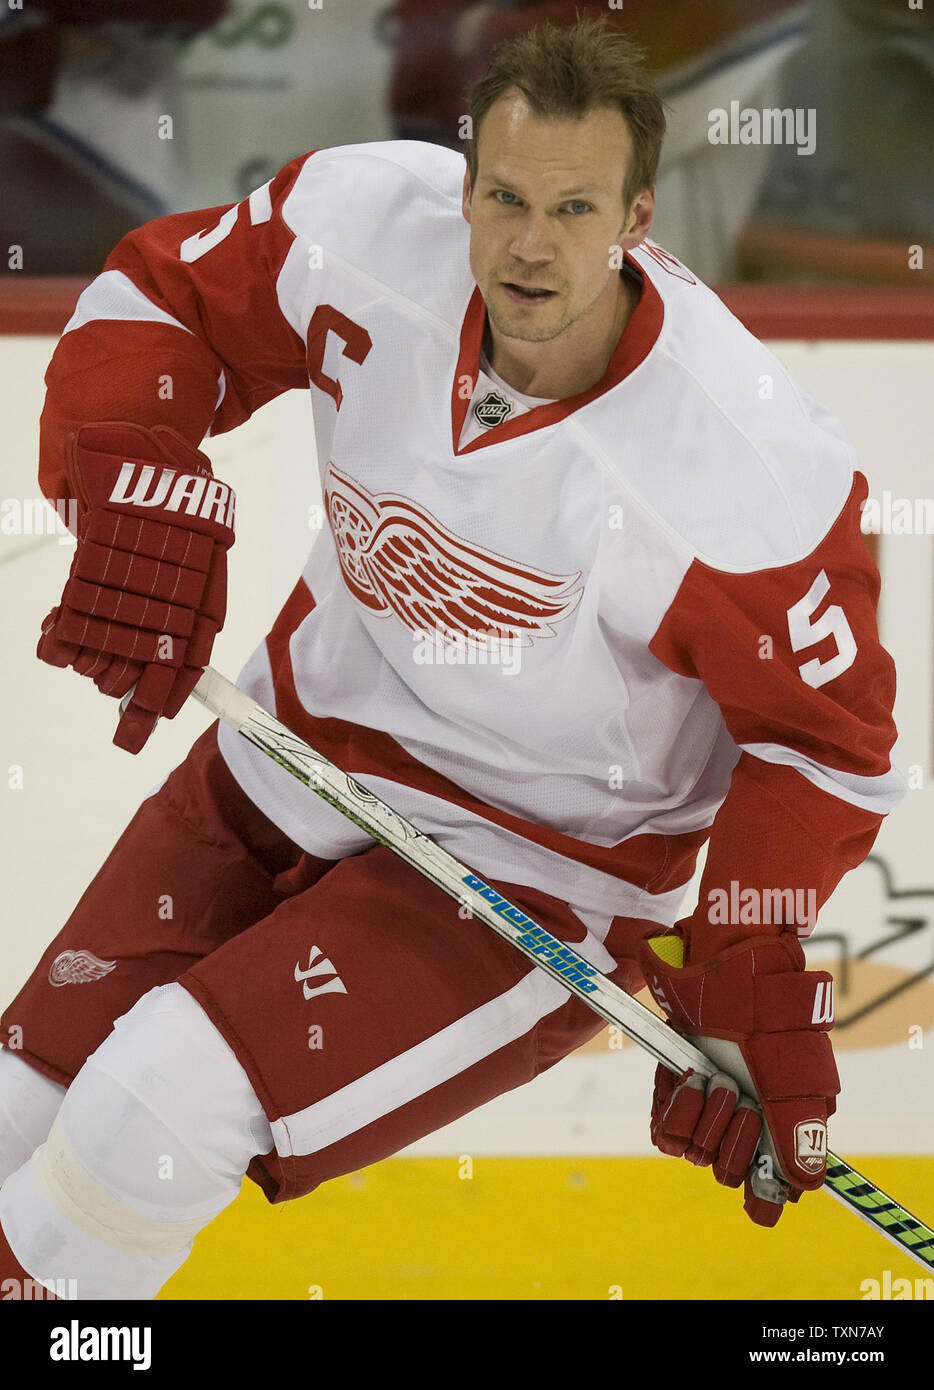 Jersey Of Nick Lidstrom Photos and Premium High Res Pictures